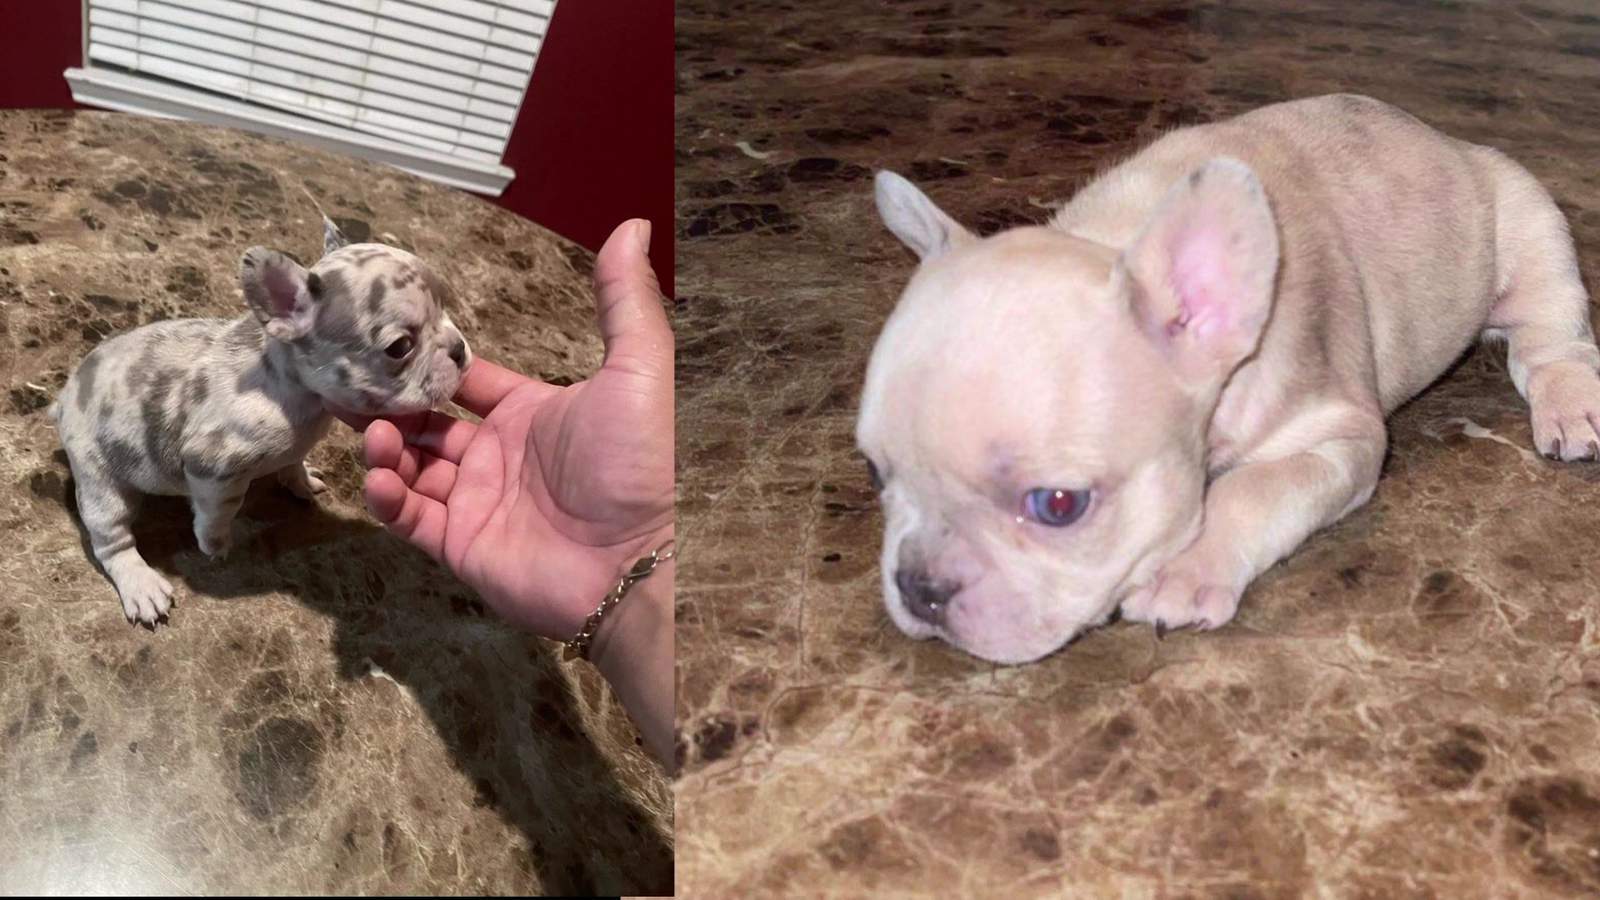 Man believes he was set up after 5 French bulldogs were stolen from him in west Houston